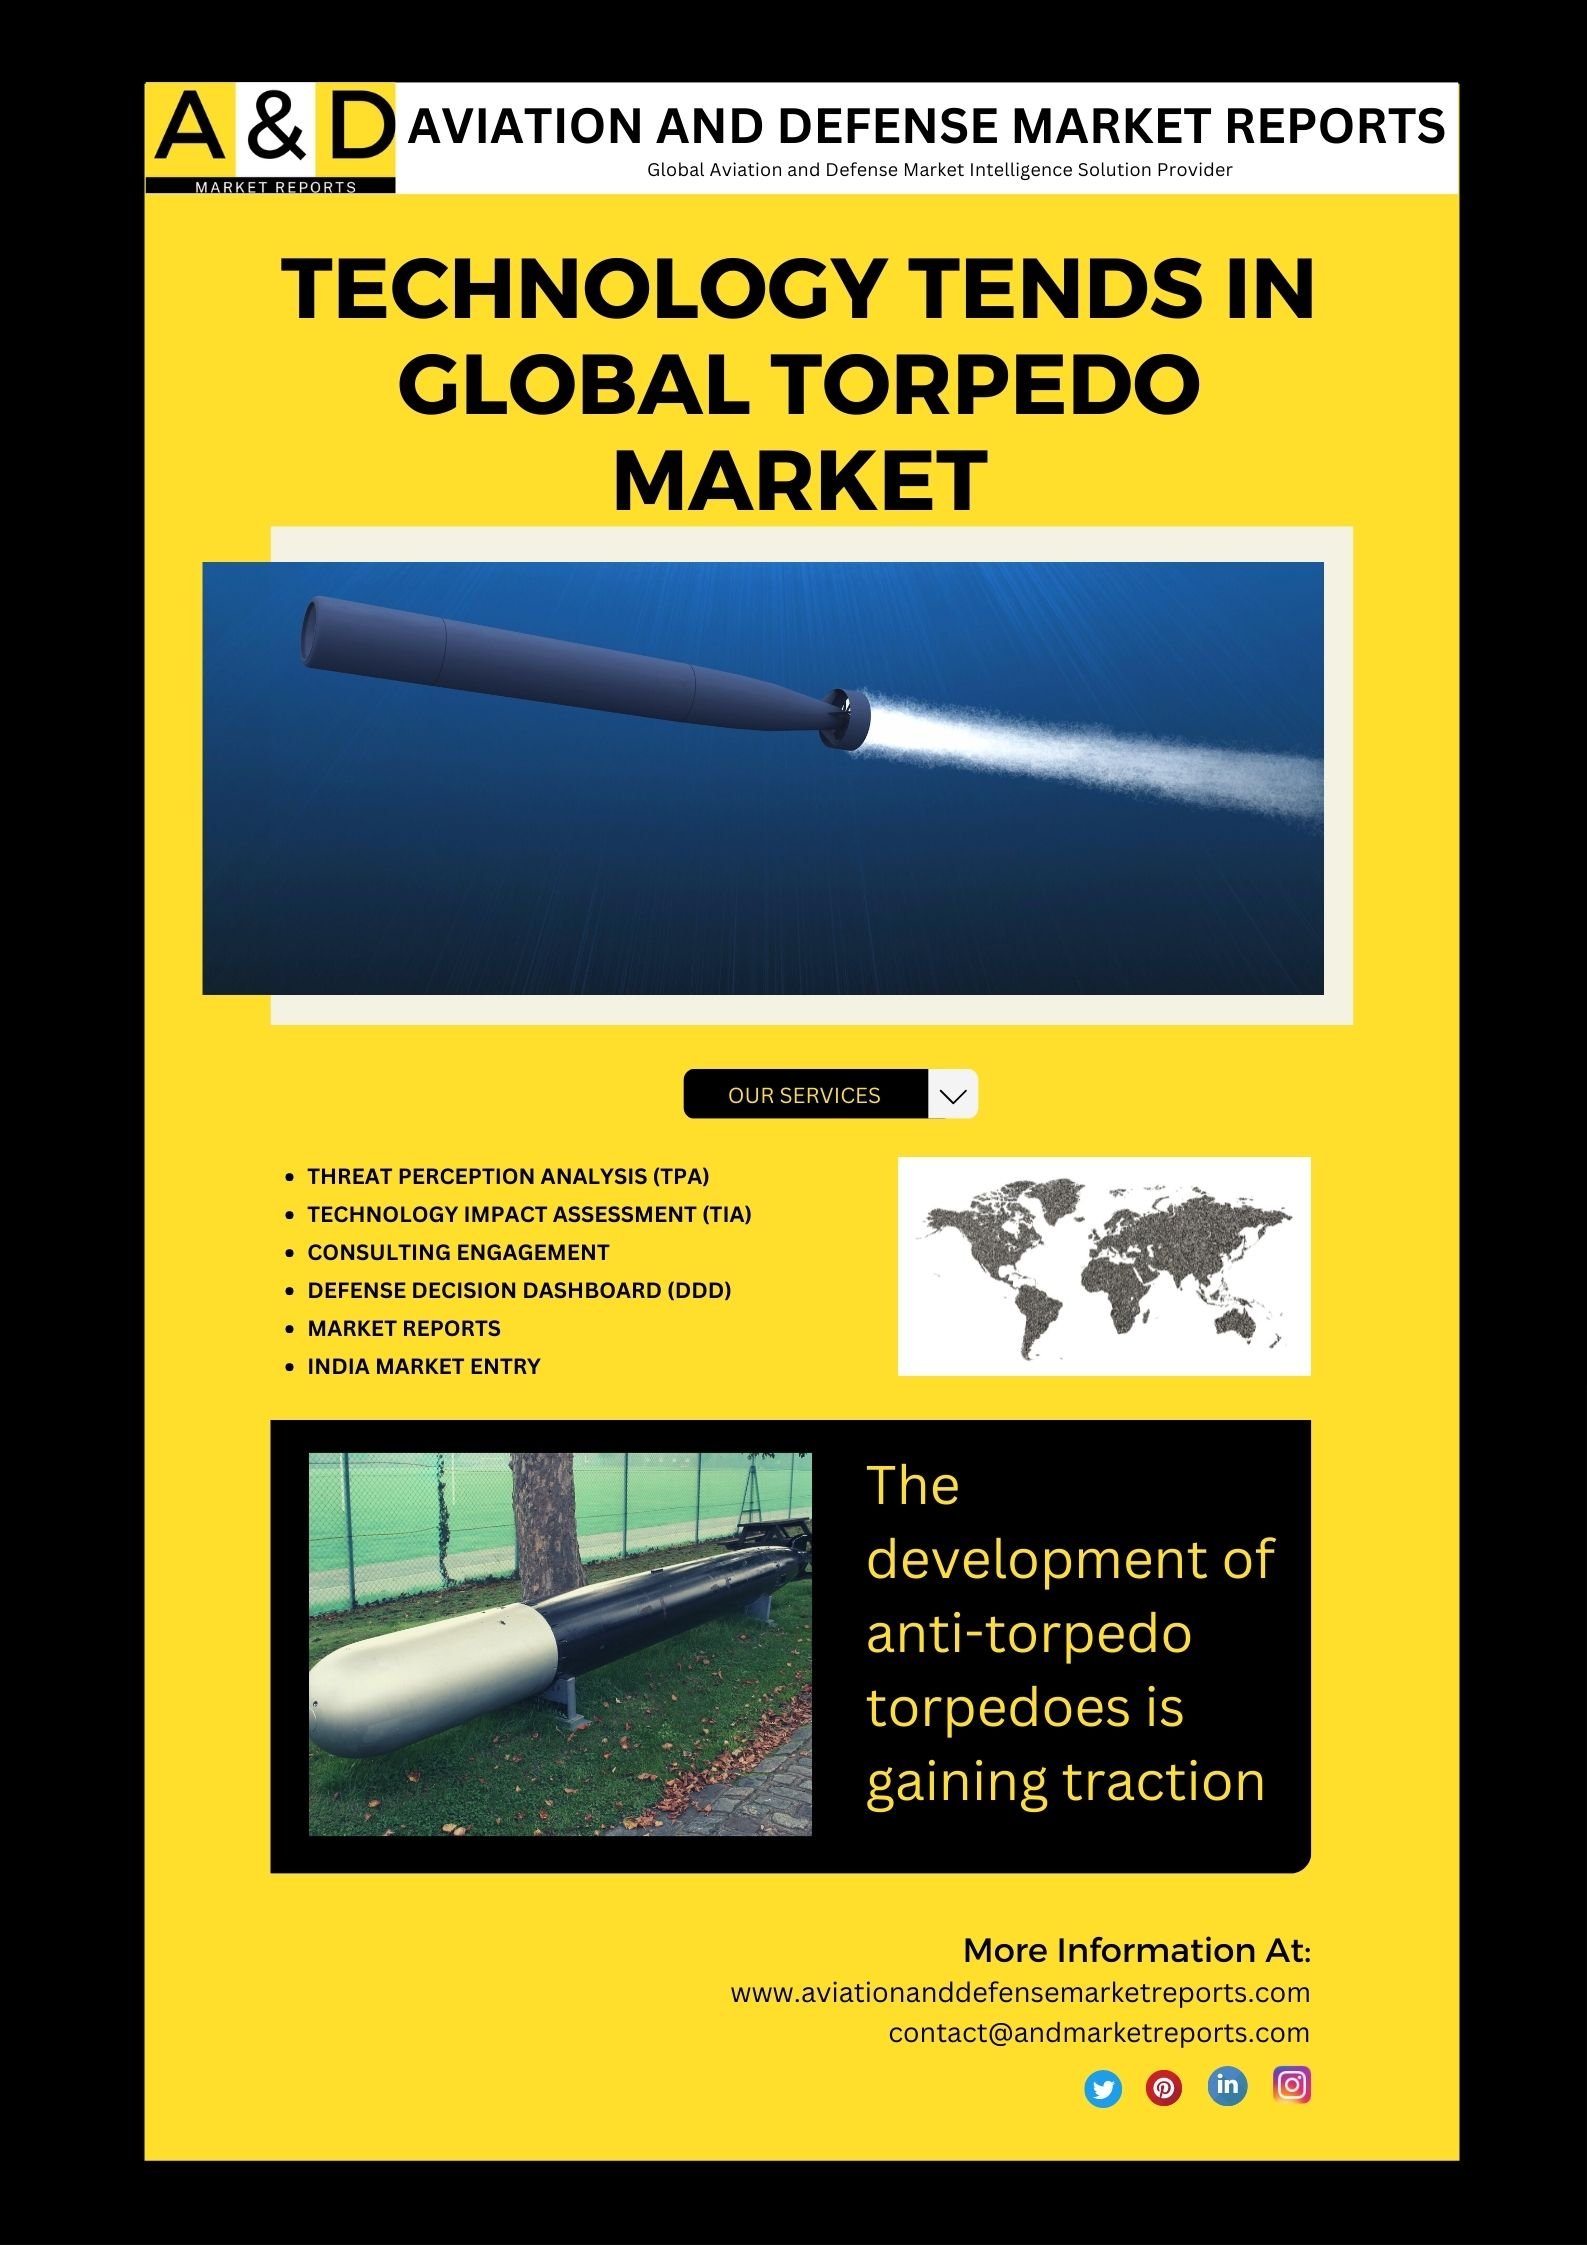 Range Of Torpedoes Continues To Be A Challenge As Nations Push Ahead With New Torpedo Program